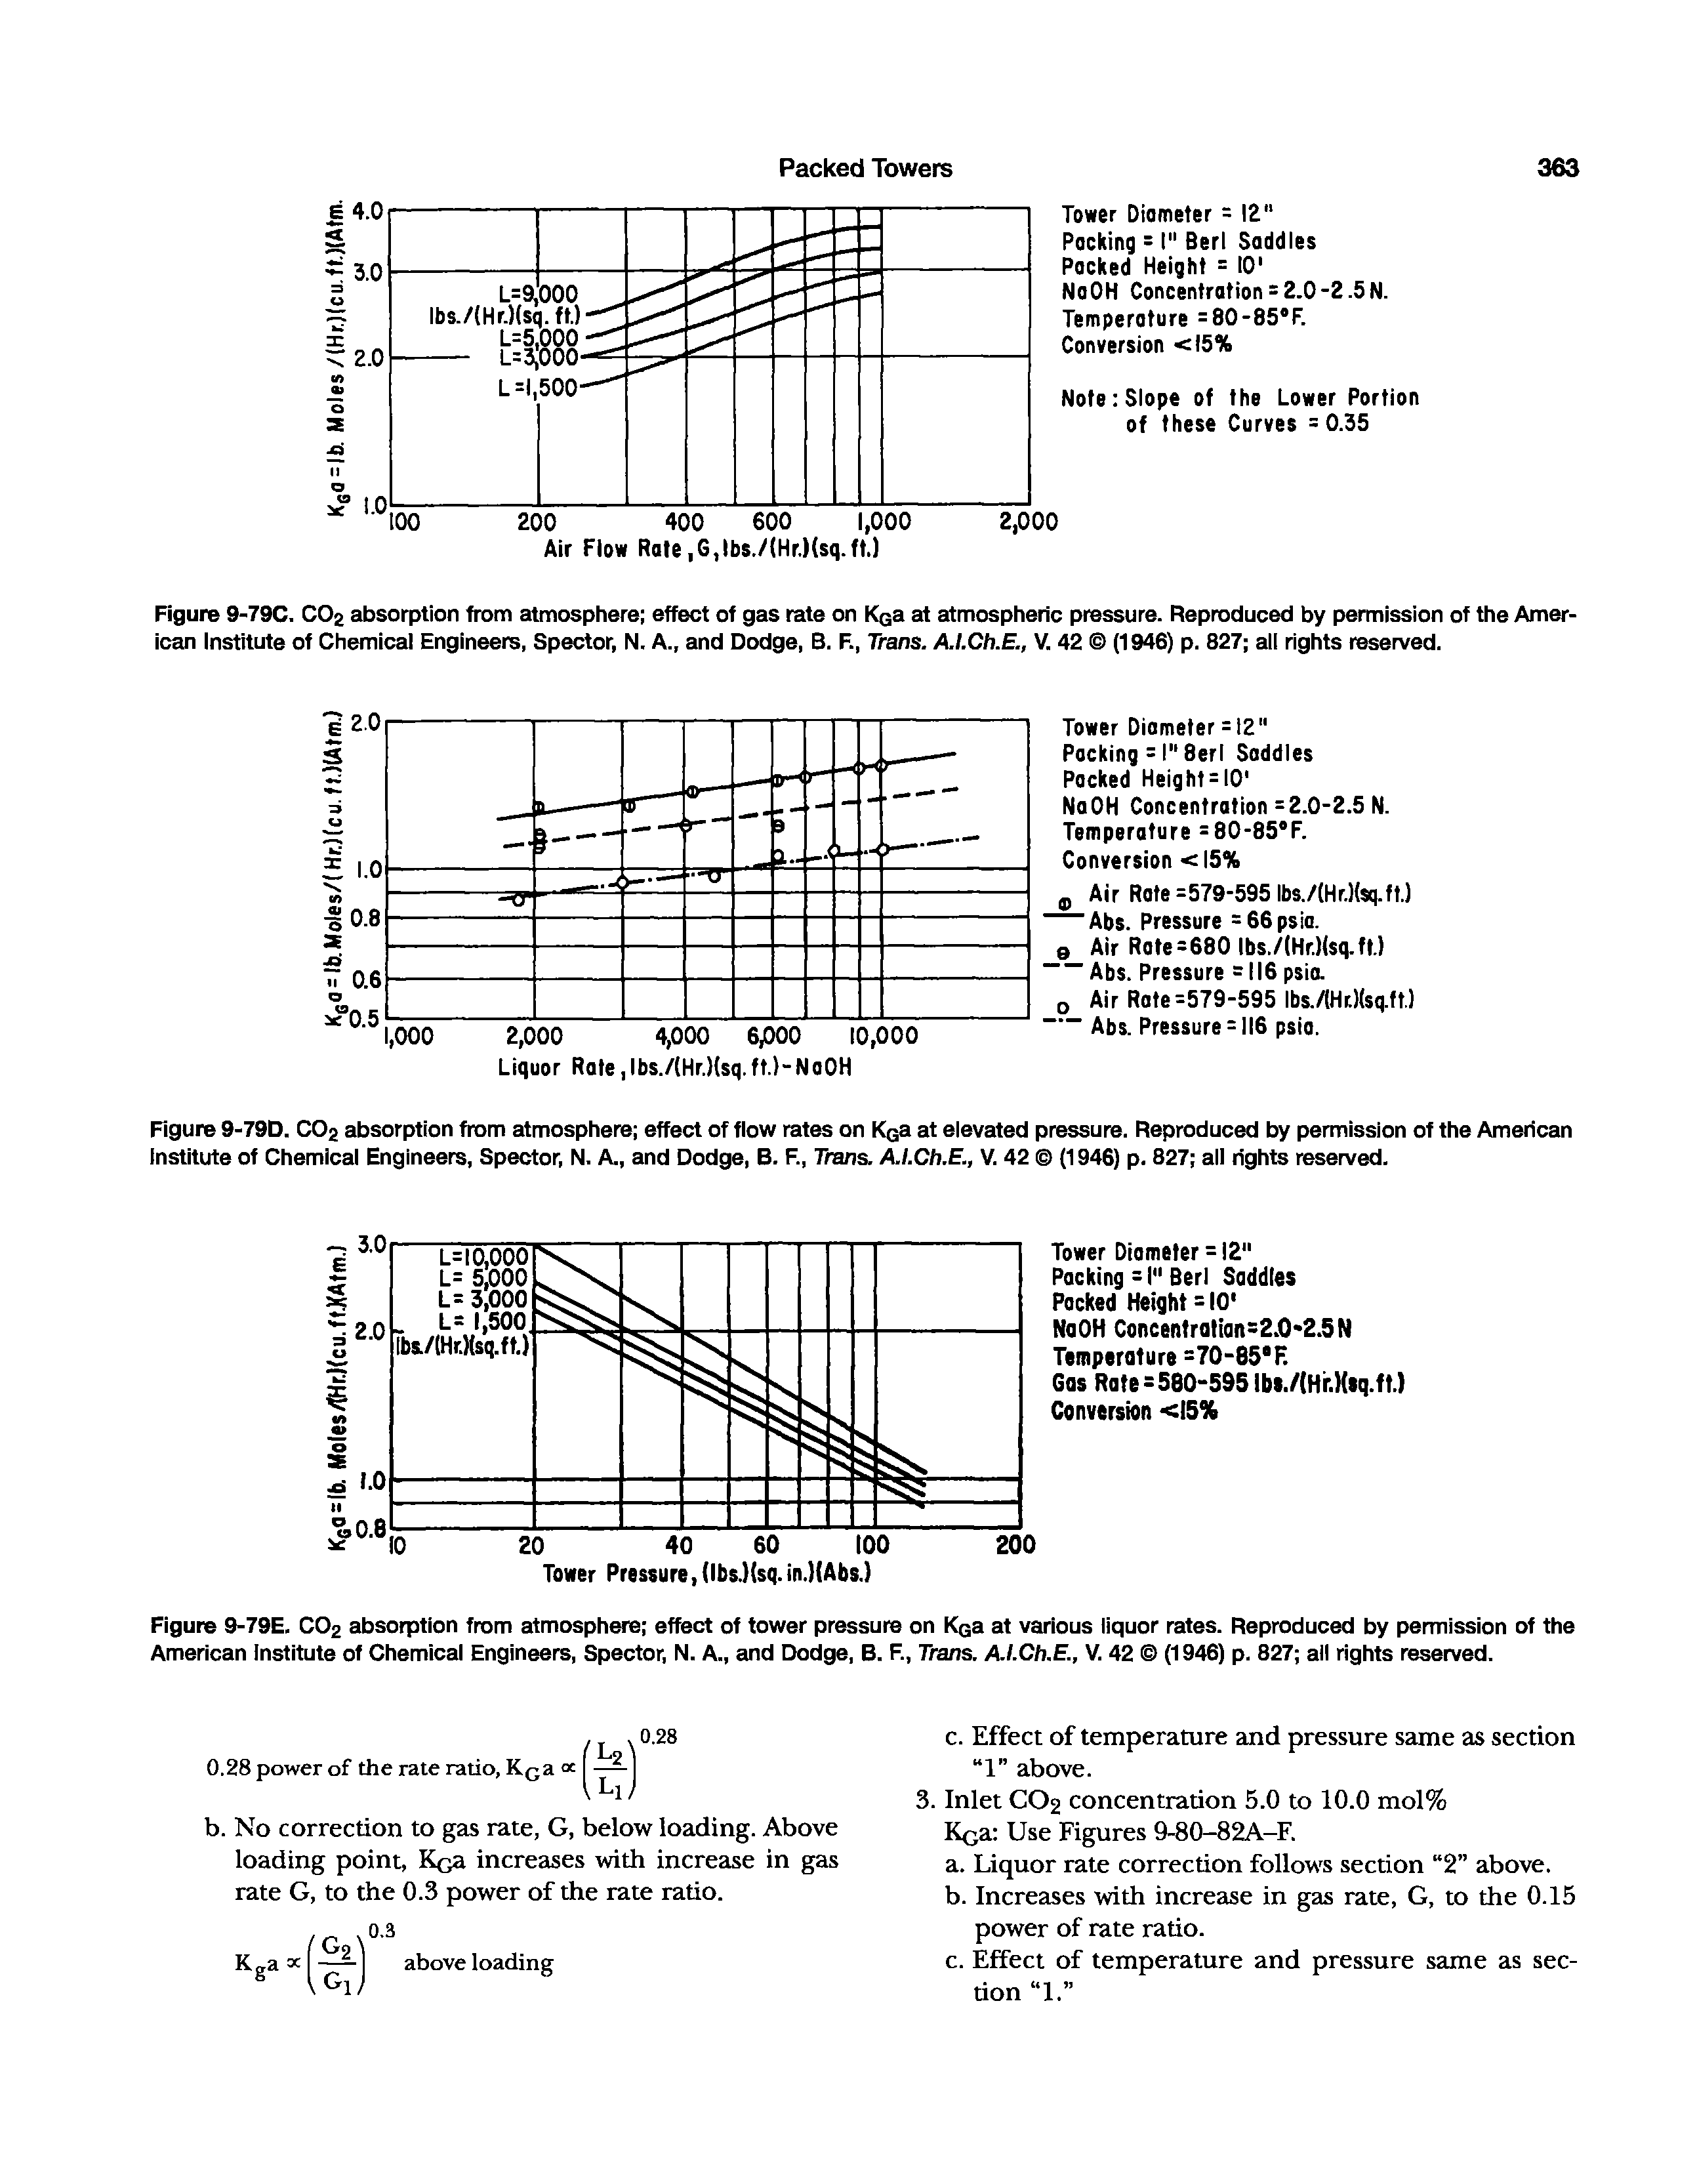 Figure 9-79D. COg absorption from atmosphere effect of flow rates on Koa at elevated pressure. Reproduced by permission of the American Institute of Chemical Engineers, Spector, N. A., and Dodge, B. F., Trans. A.I.Ch.E., V. 42 (1946) p. 827 all rights resenred.